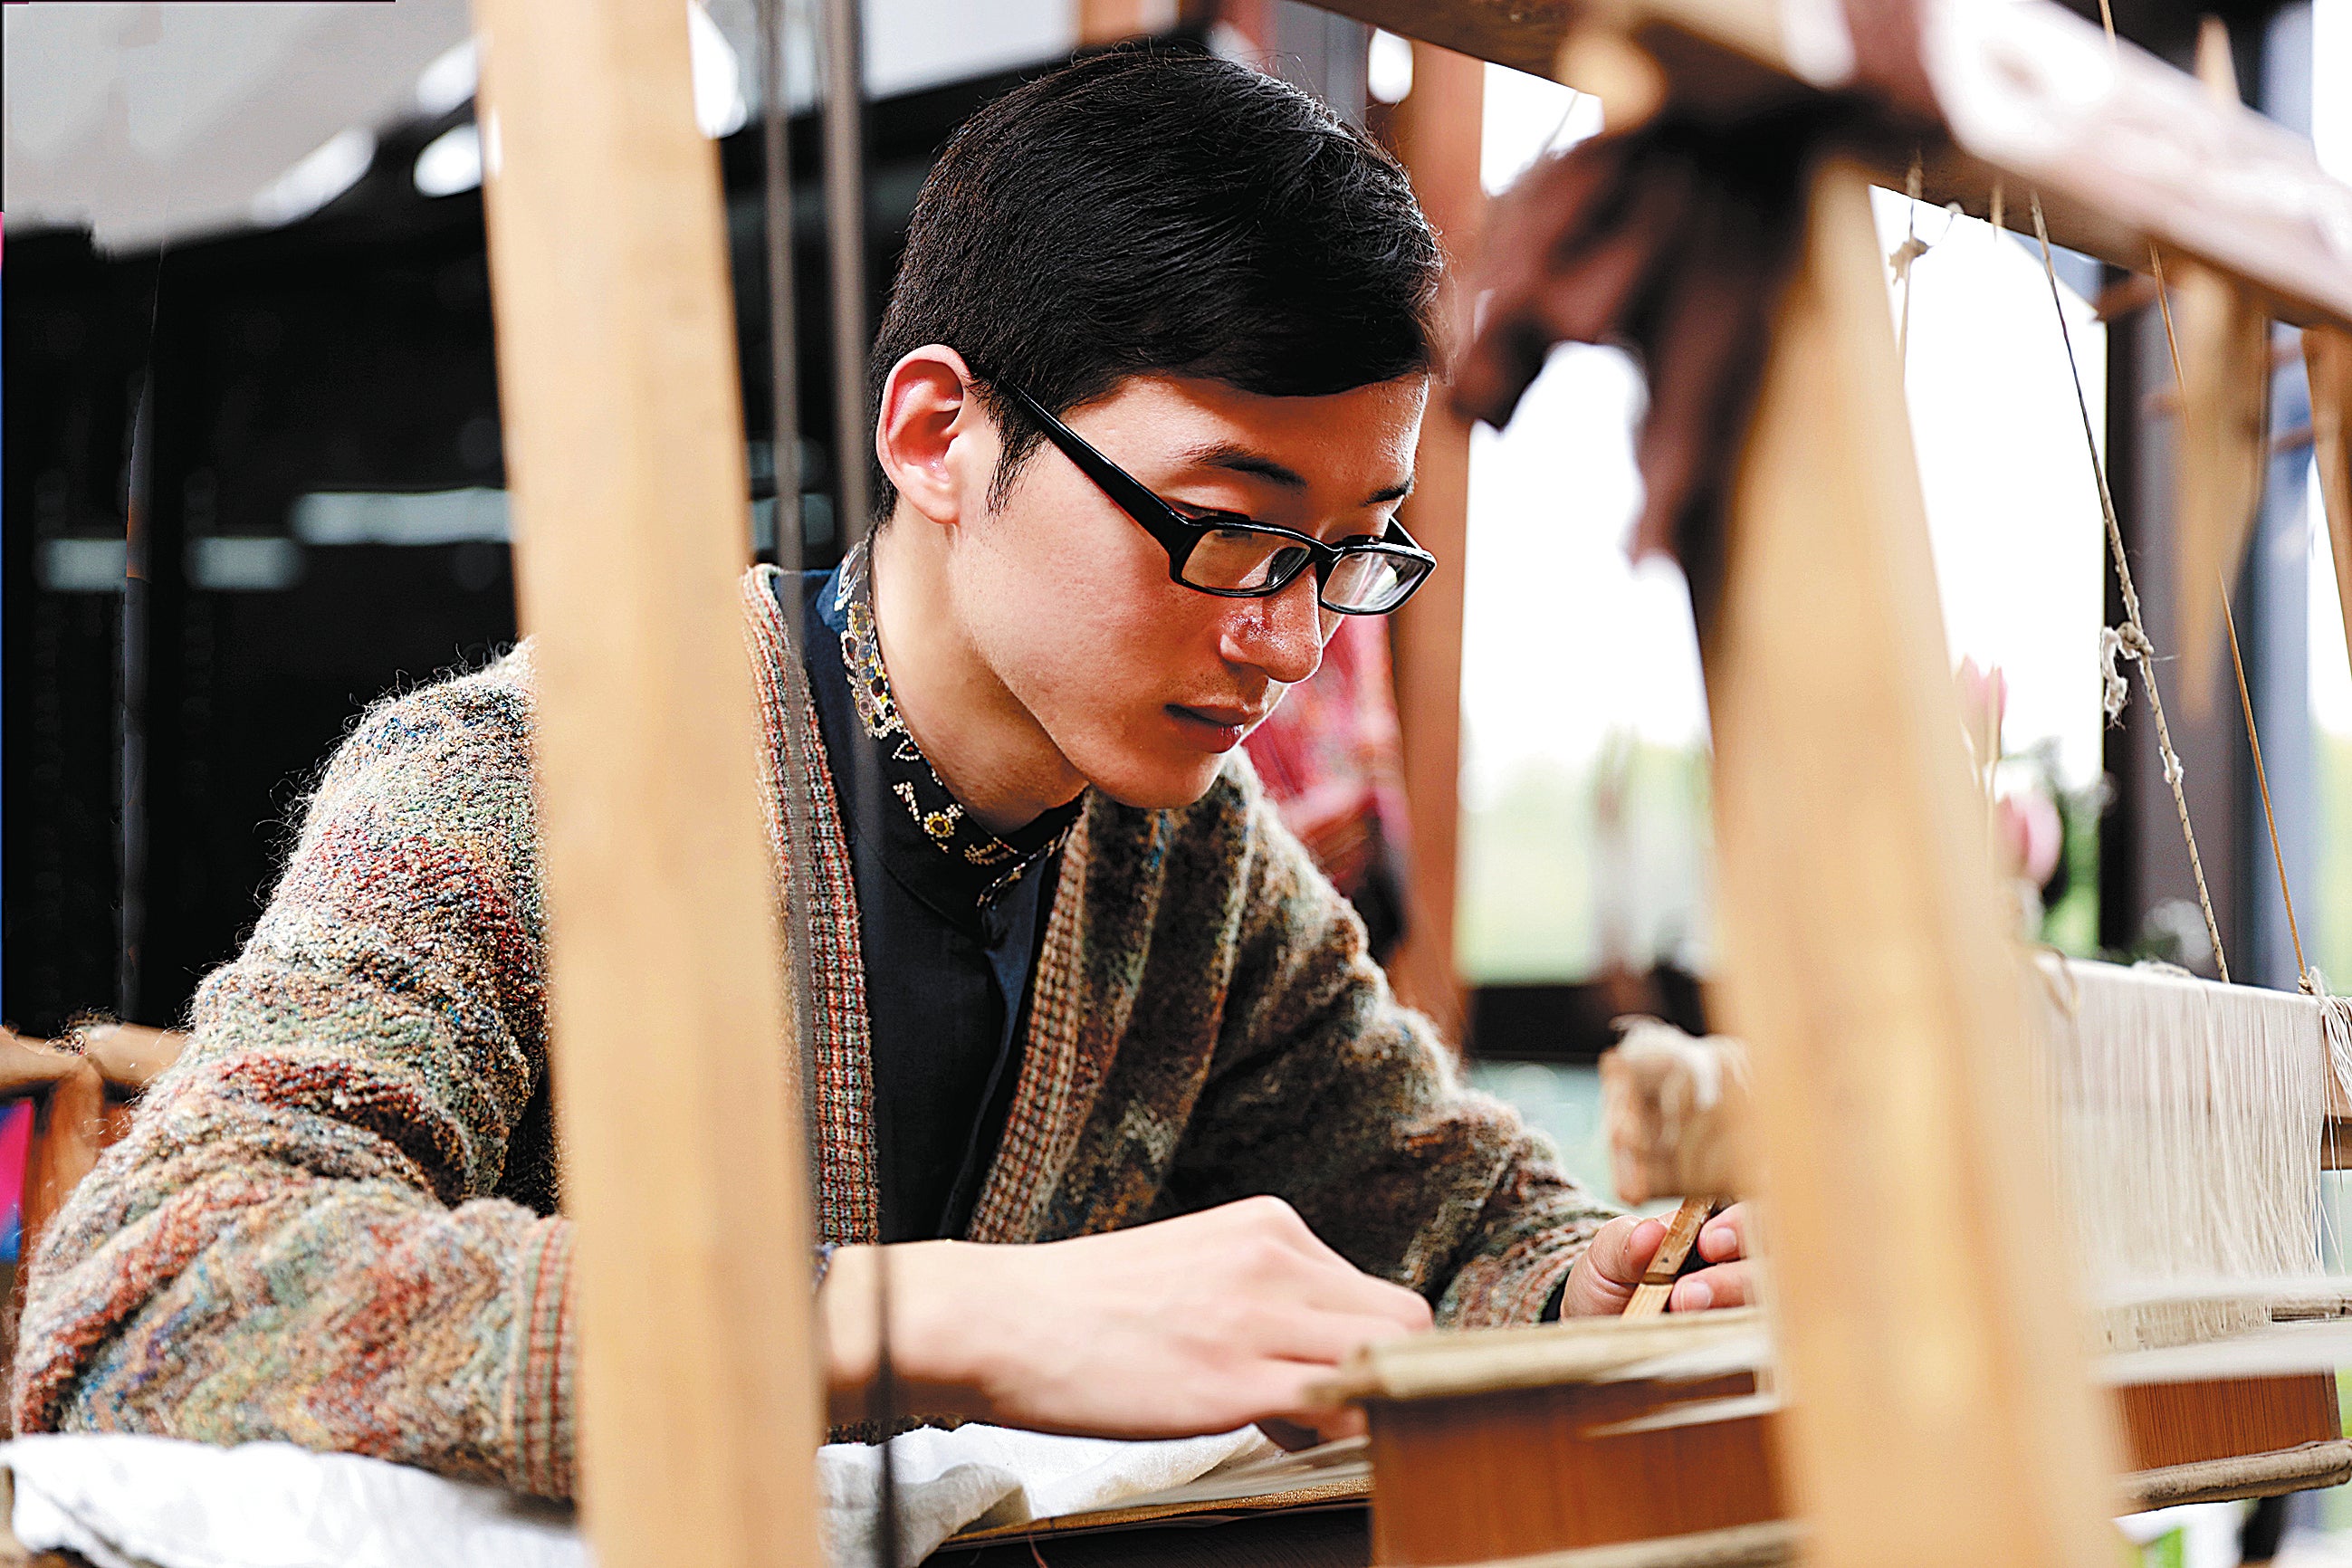 Artist Hao Naiqiang works on a silk craft called kesi, a UNESCO Intangible Cultural Heritage, at his studio in Suzhou, Jiangsu province